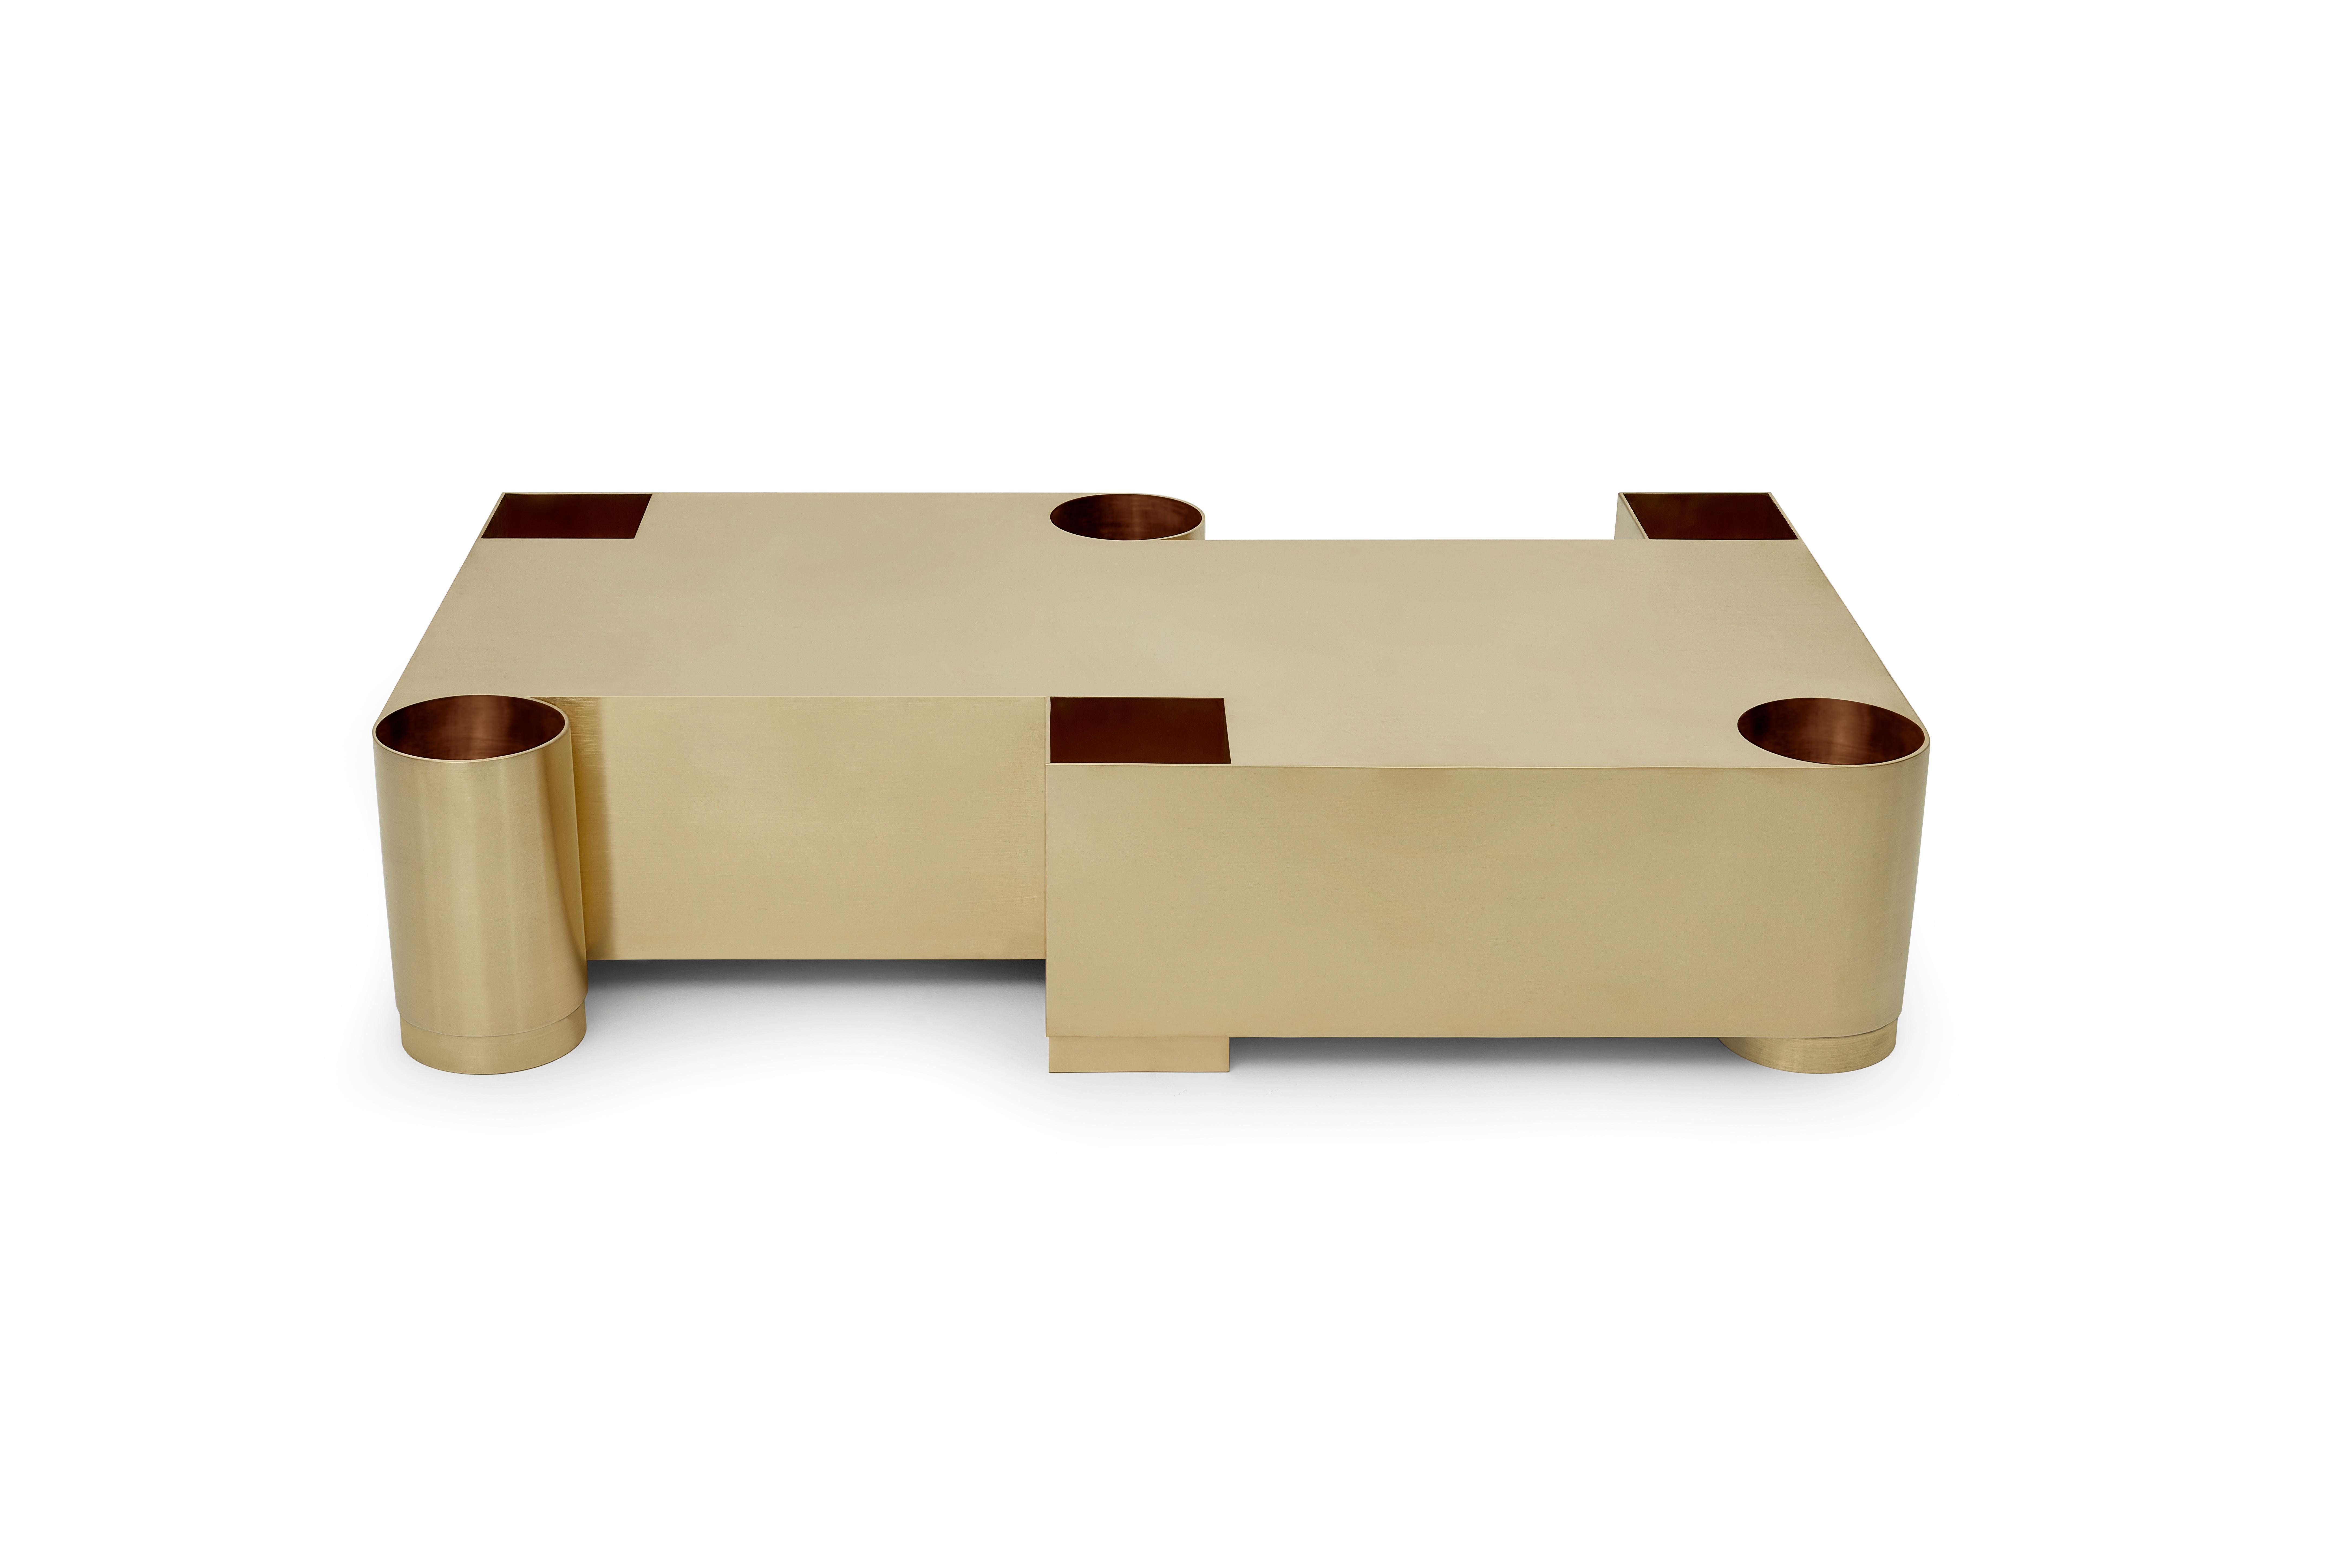 Equation coffee table by Marta Delgado Studio

Contemporary coffee table

Model on the picture:
Metal: Brass
Finish: Brushed

Dimensions:
Width: 55.1” 140 cm 
Depth: 31.5” 80 cm 
Height: 11.8” 30 cm

Marta Delgado is a Portuguese